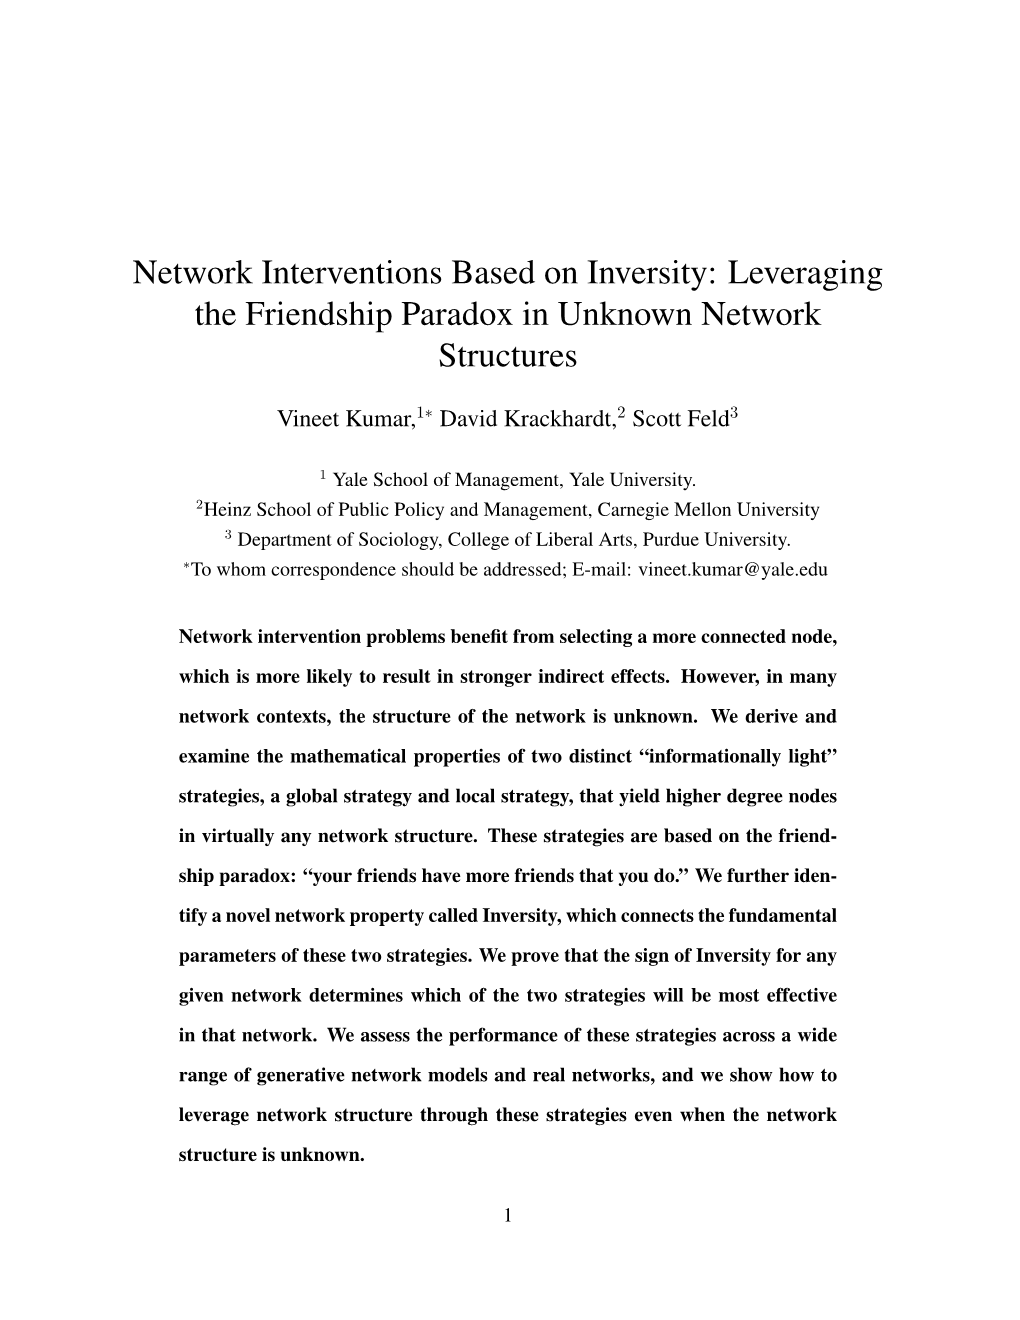 Network Interventions Based on Inversity: Leveraging the Friendship Paradox in Unknown Network Structures